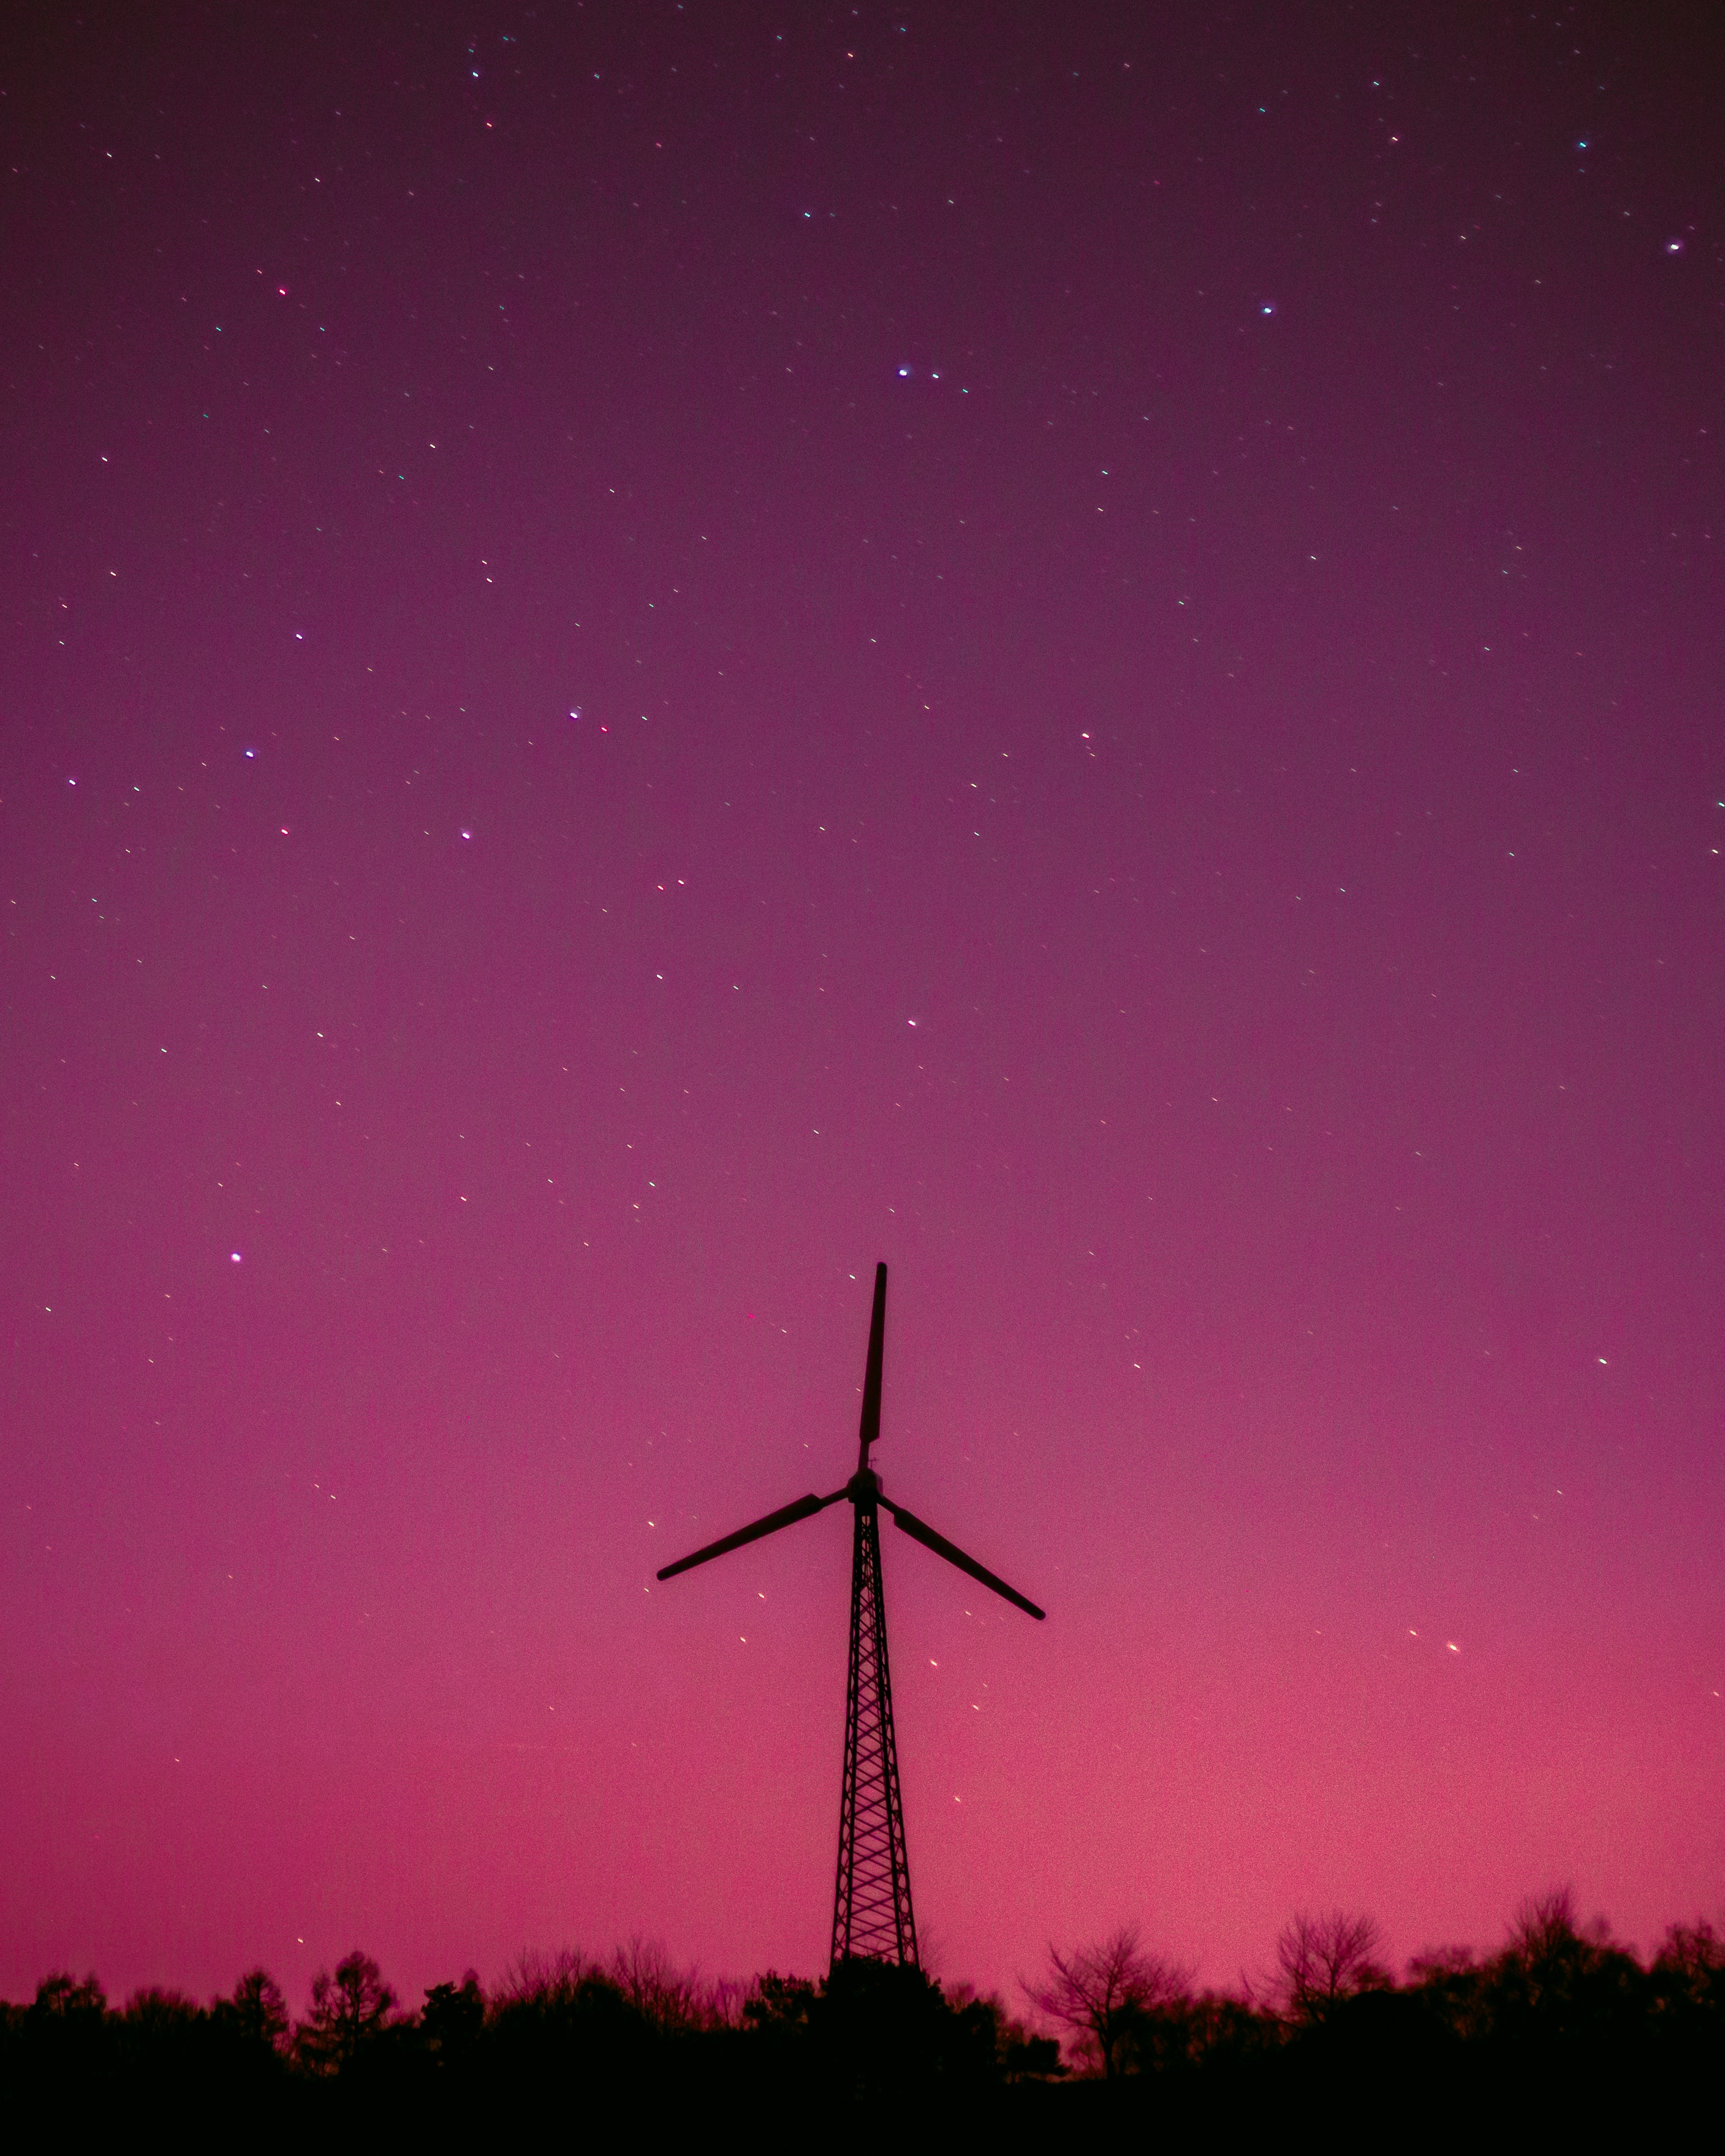 miscellanea, windmill, miscellaneous, starry sky, tower, motor, engine